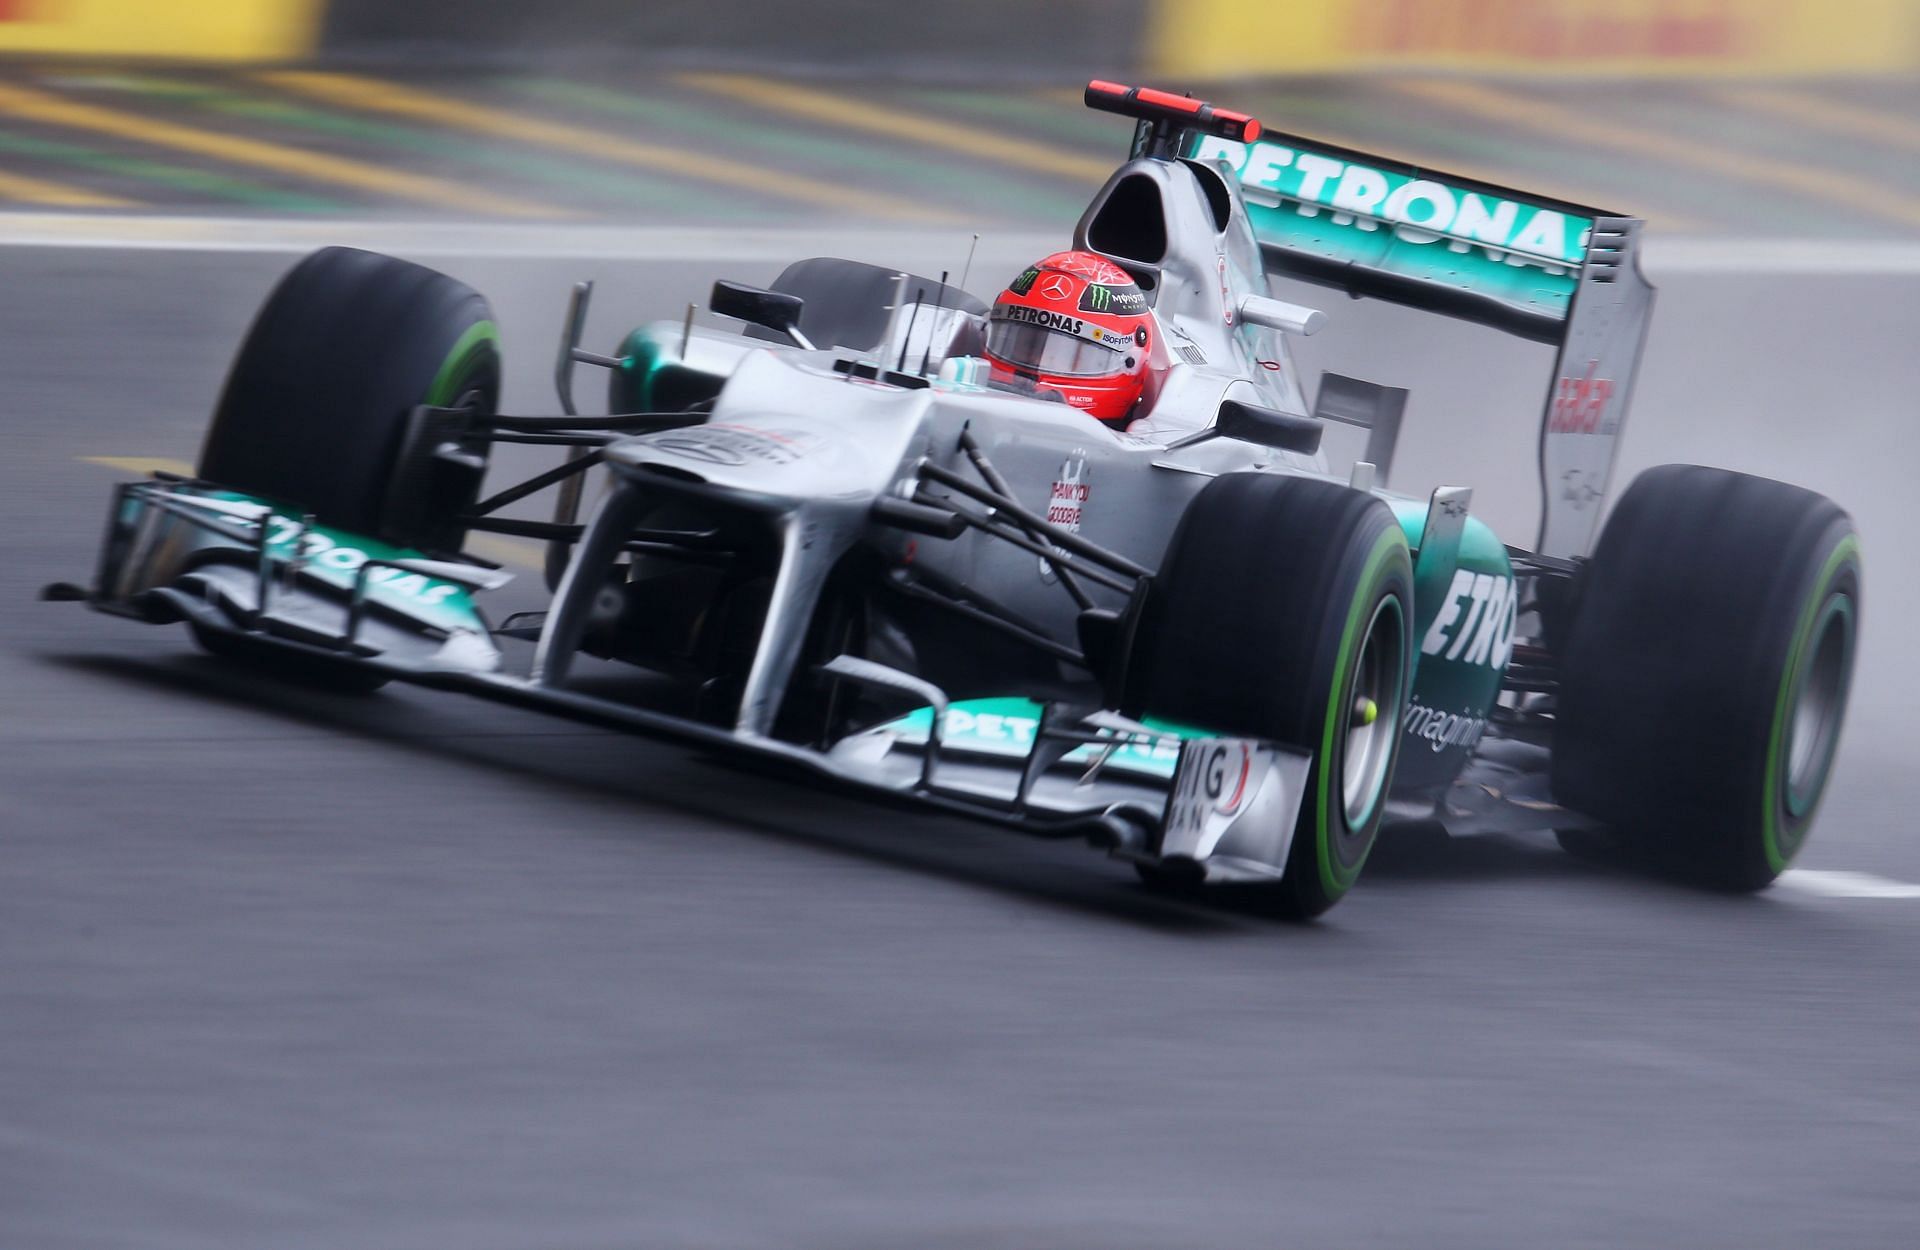 Michael Schumacher in the Mercedes, 2012 (Photo by Clive Mason/Getty Images)